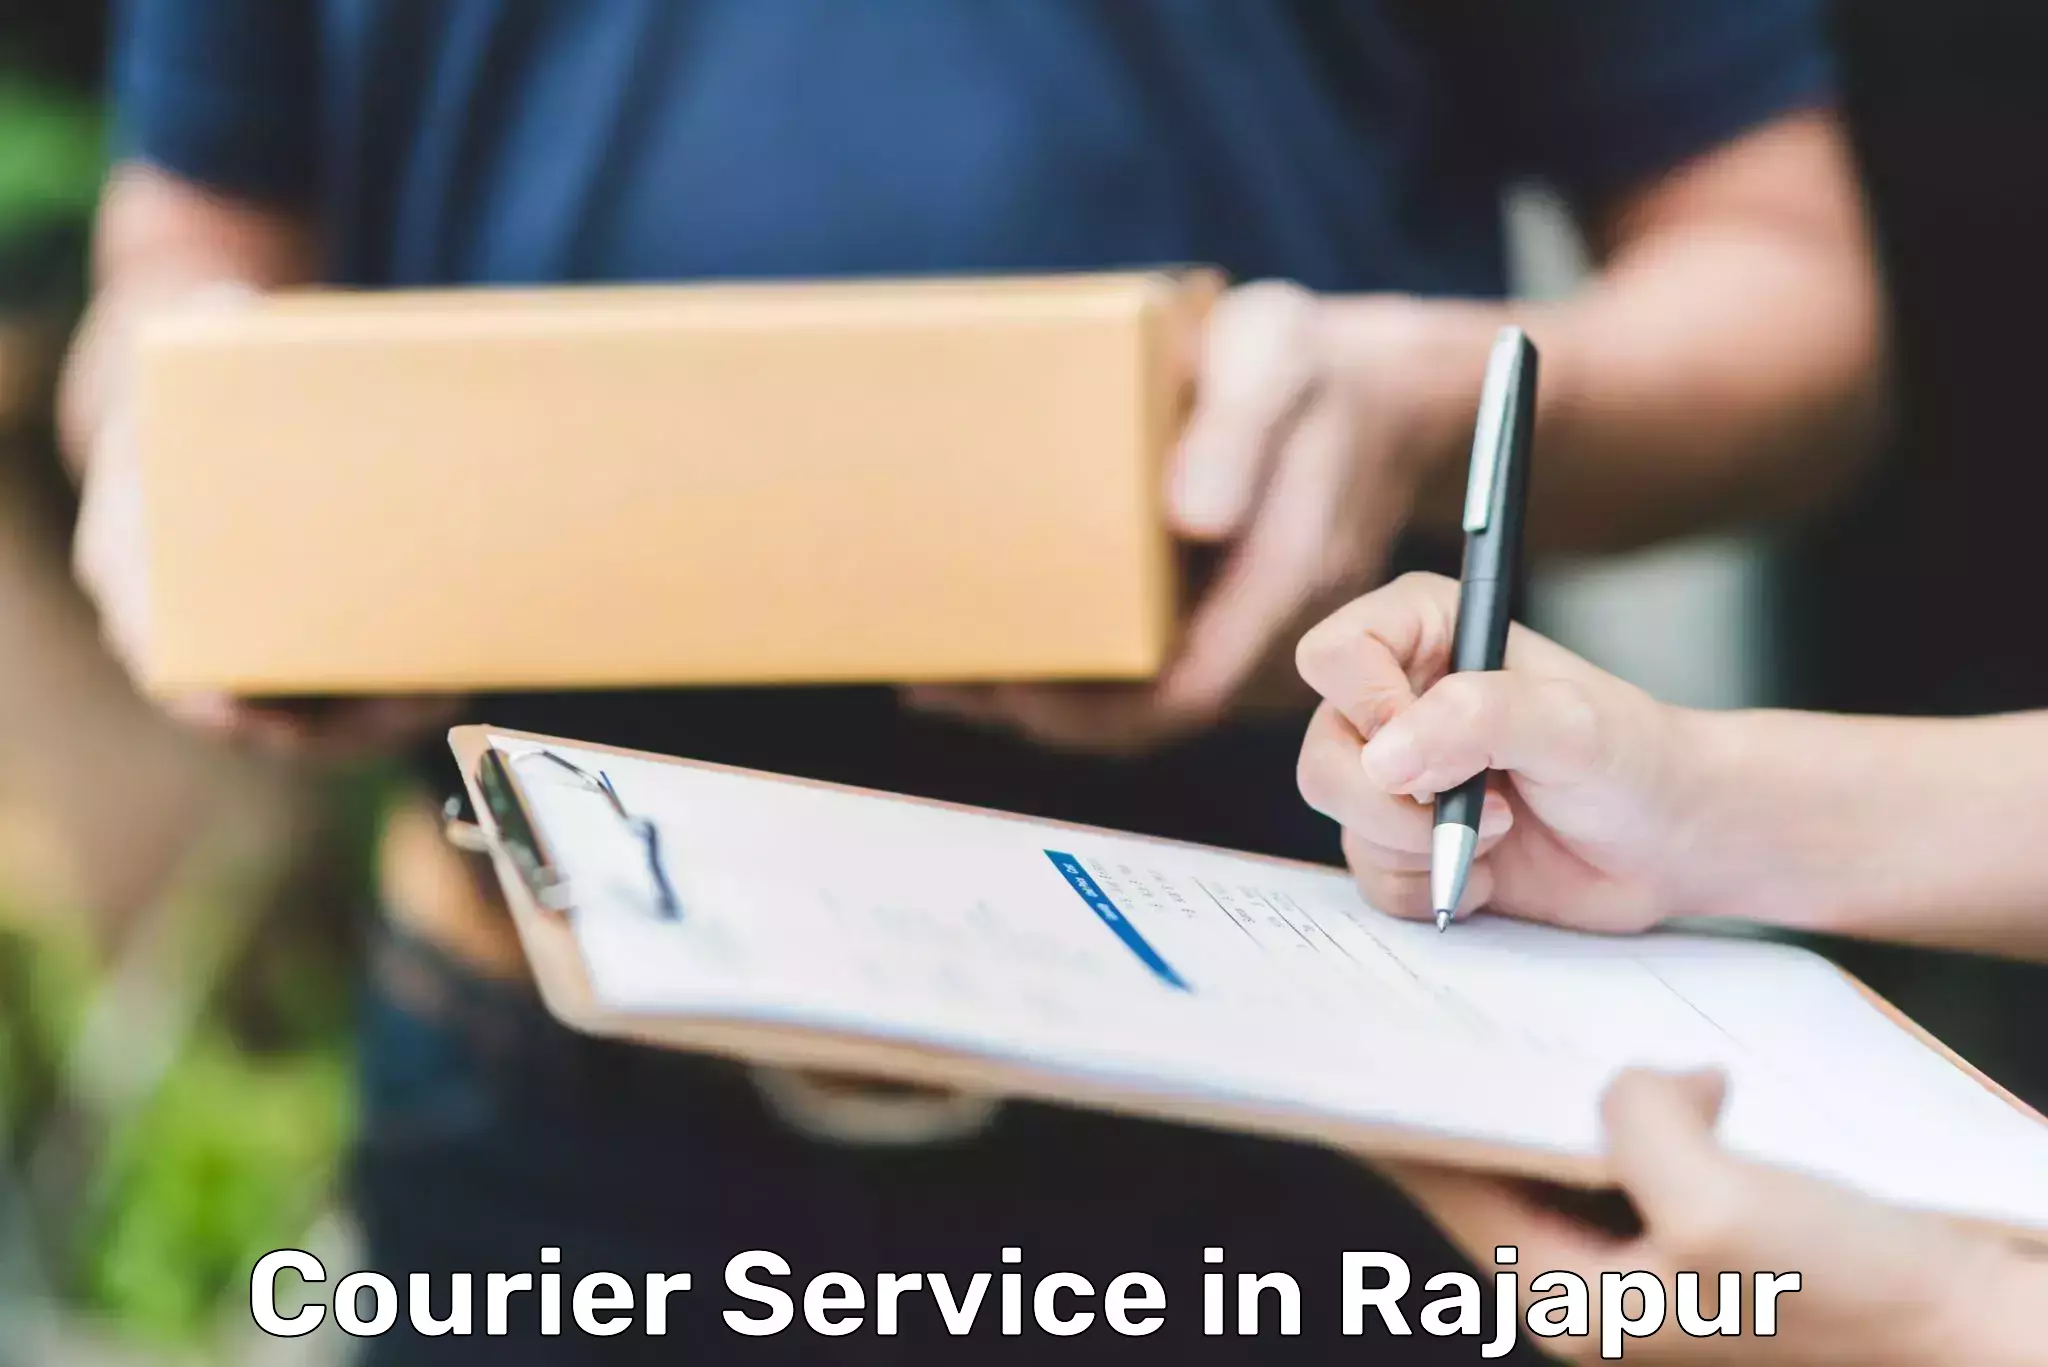 Courier service booking in Rajapur